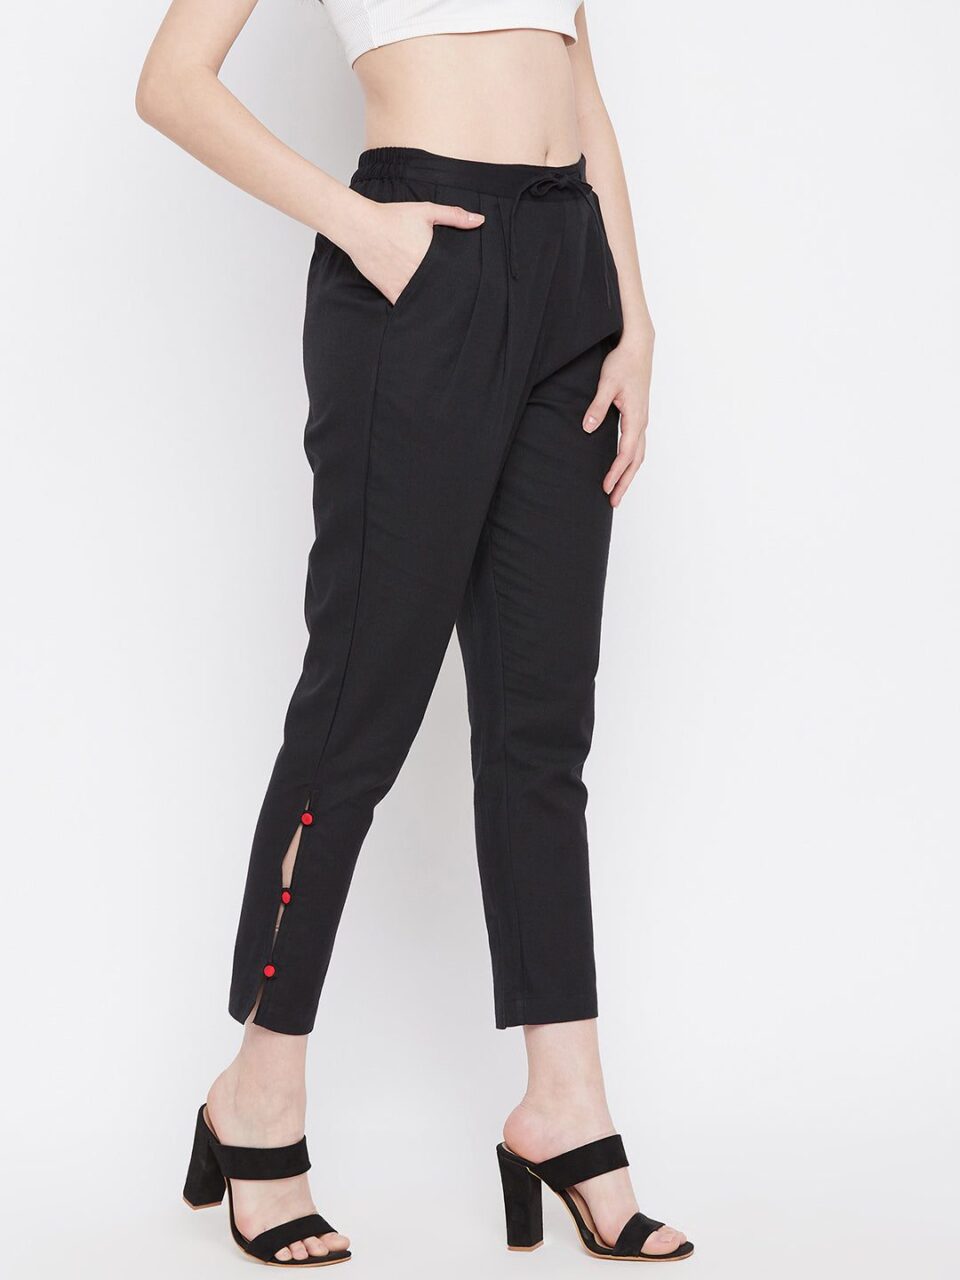 Black Regular Fit Solid Cotton Casual Trouser